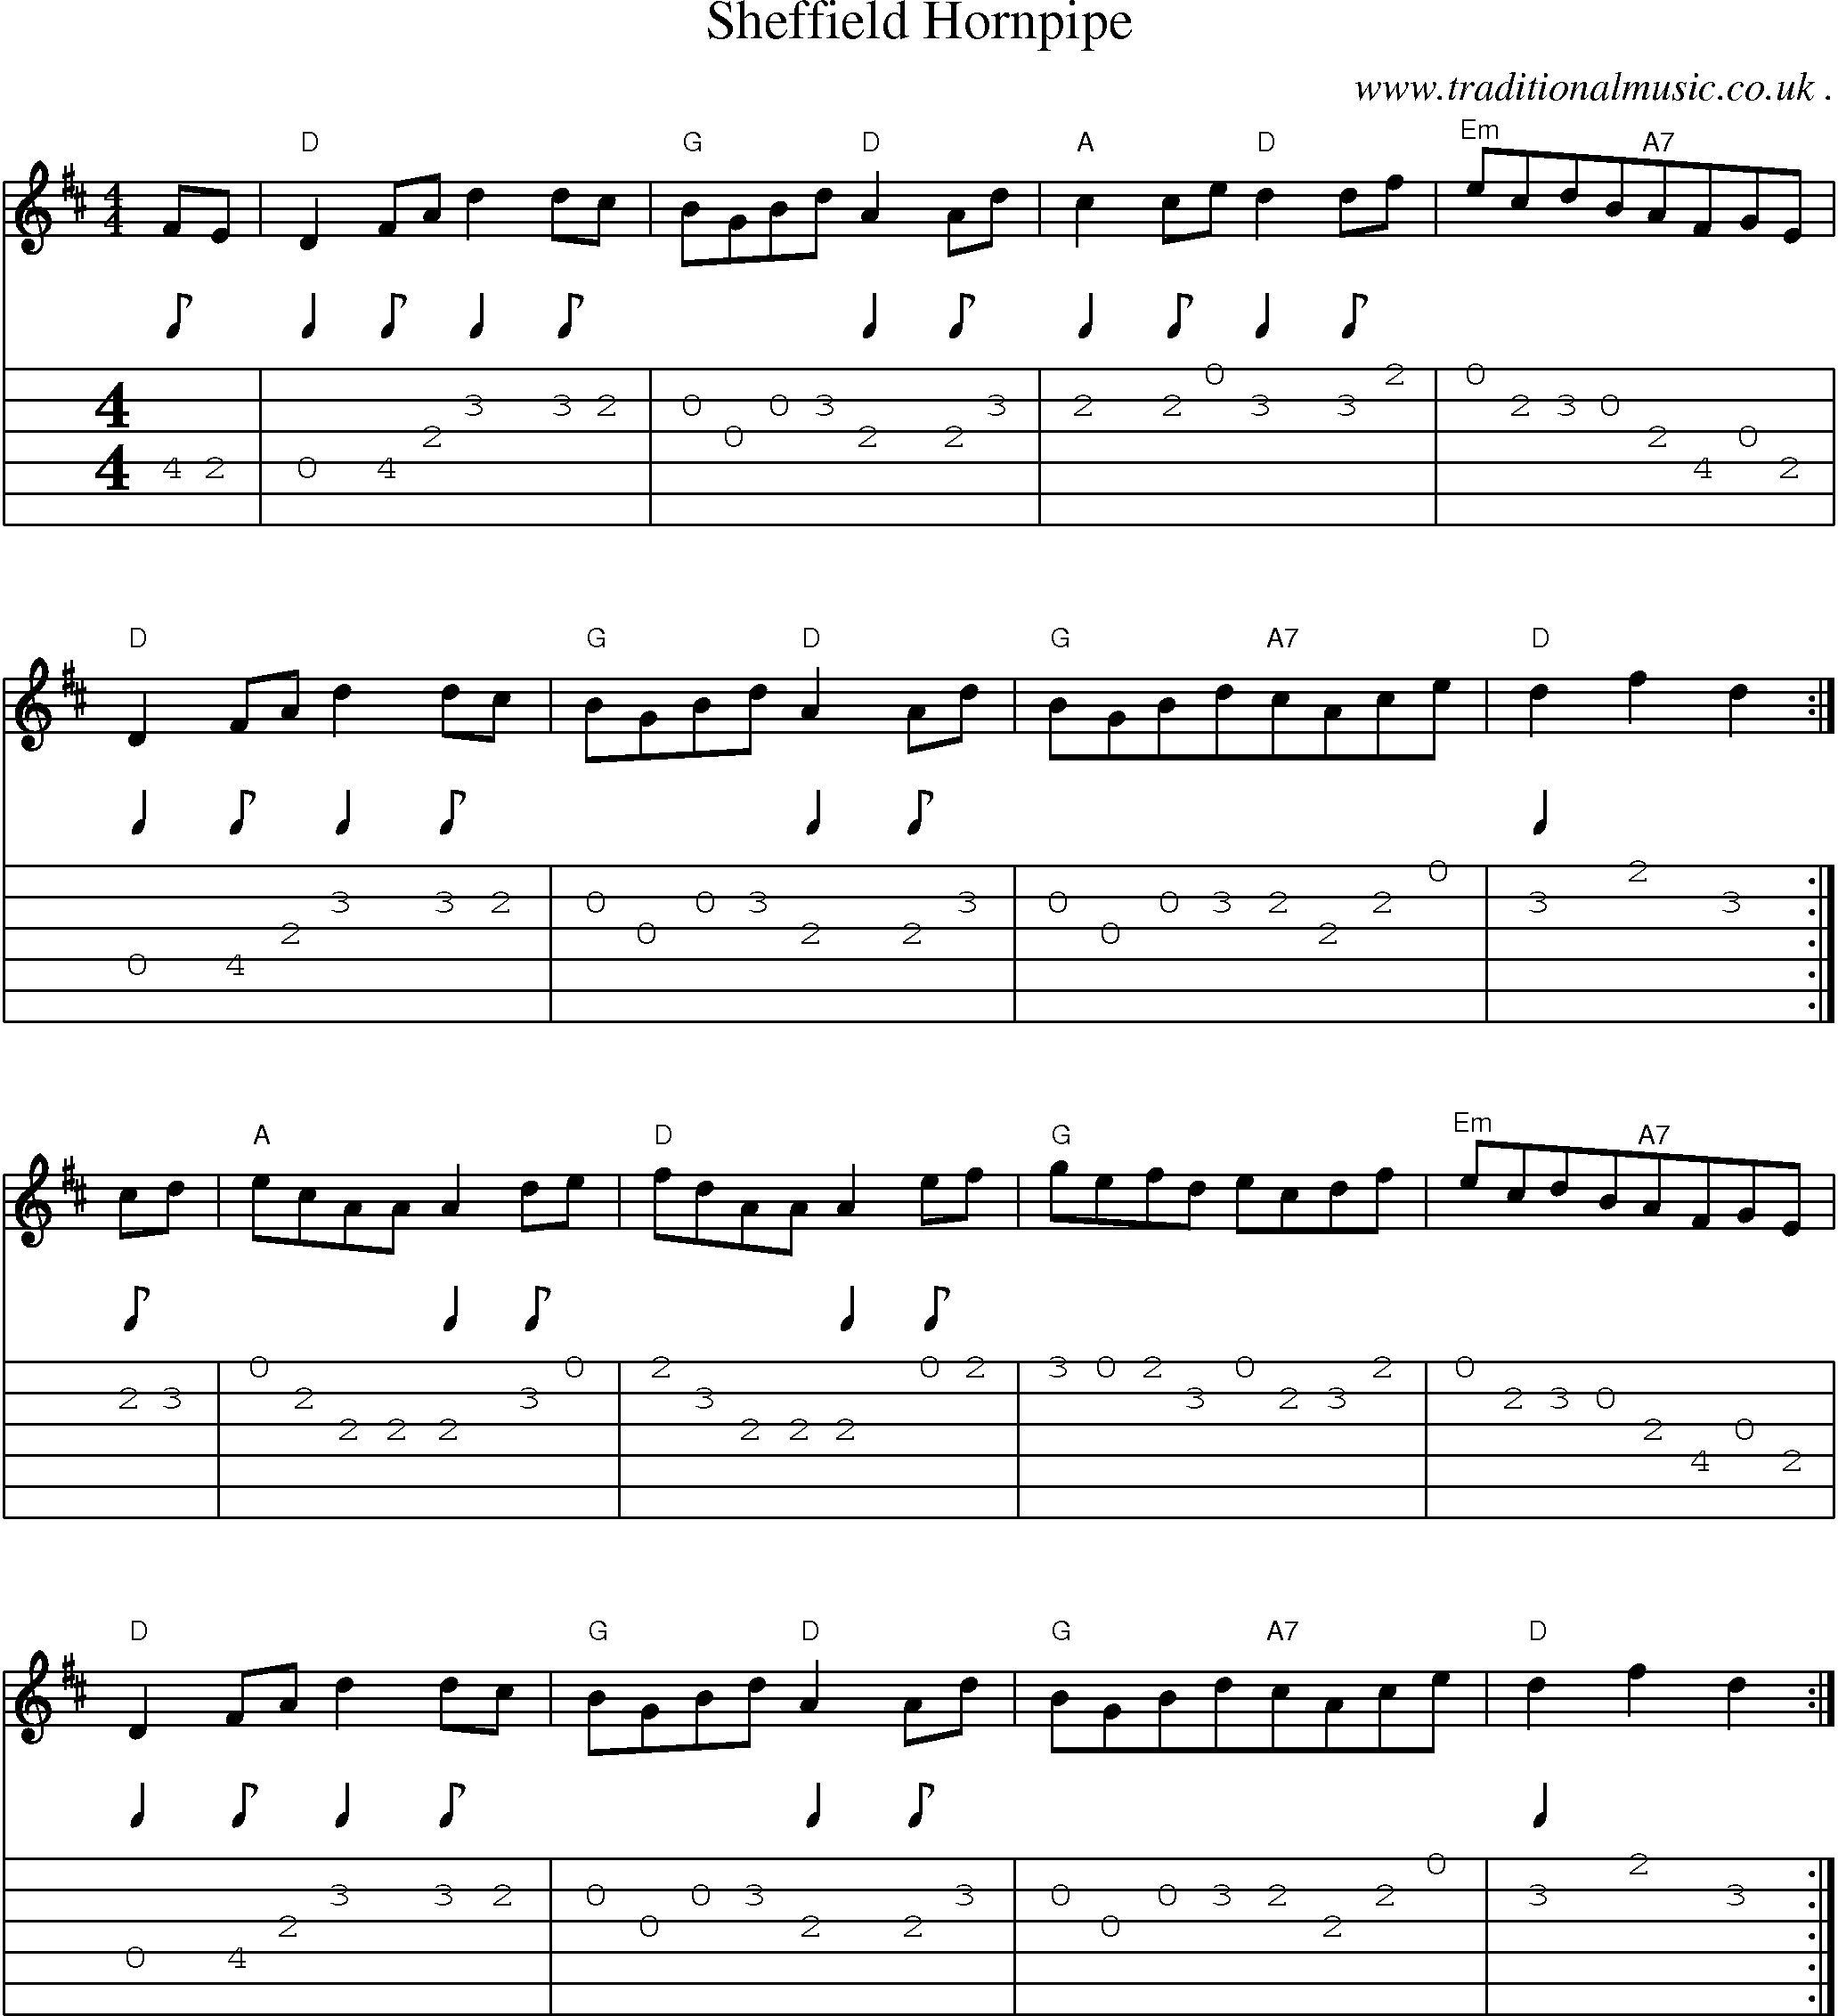 Sheet-Music and Guitar Tabs for Sheffield Hornpipe